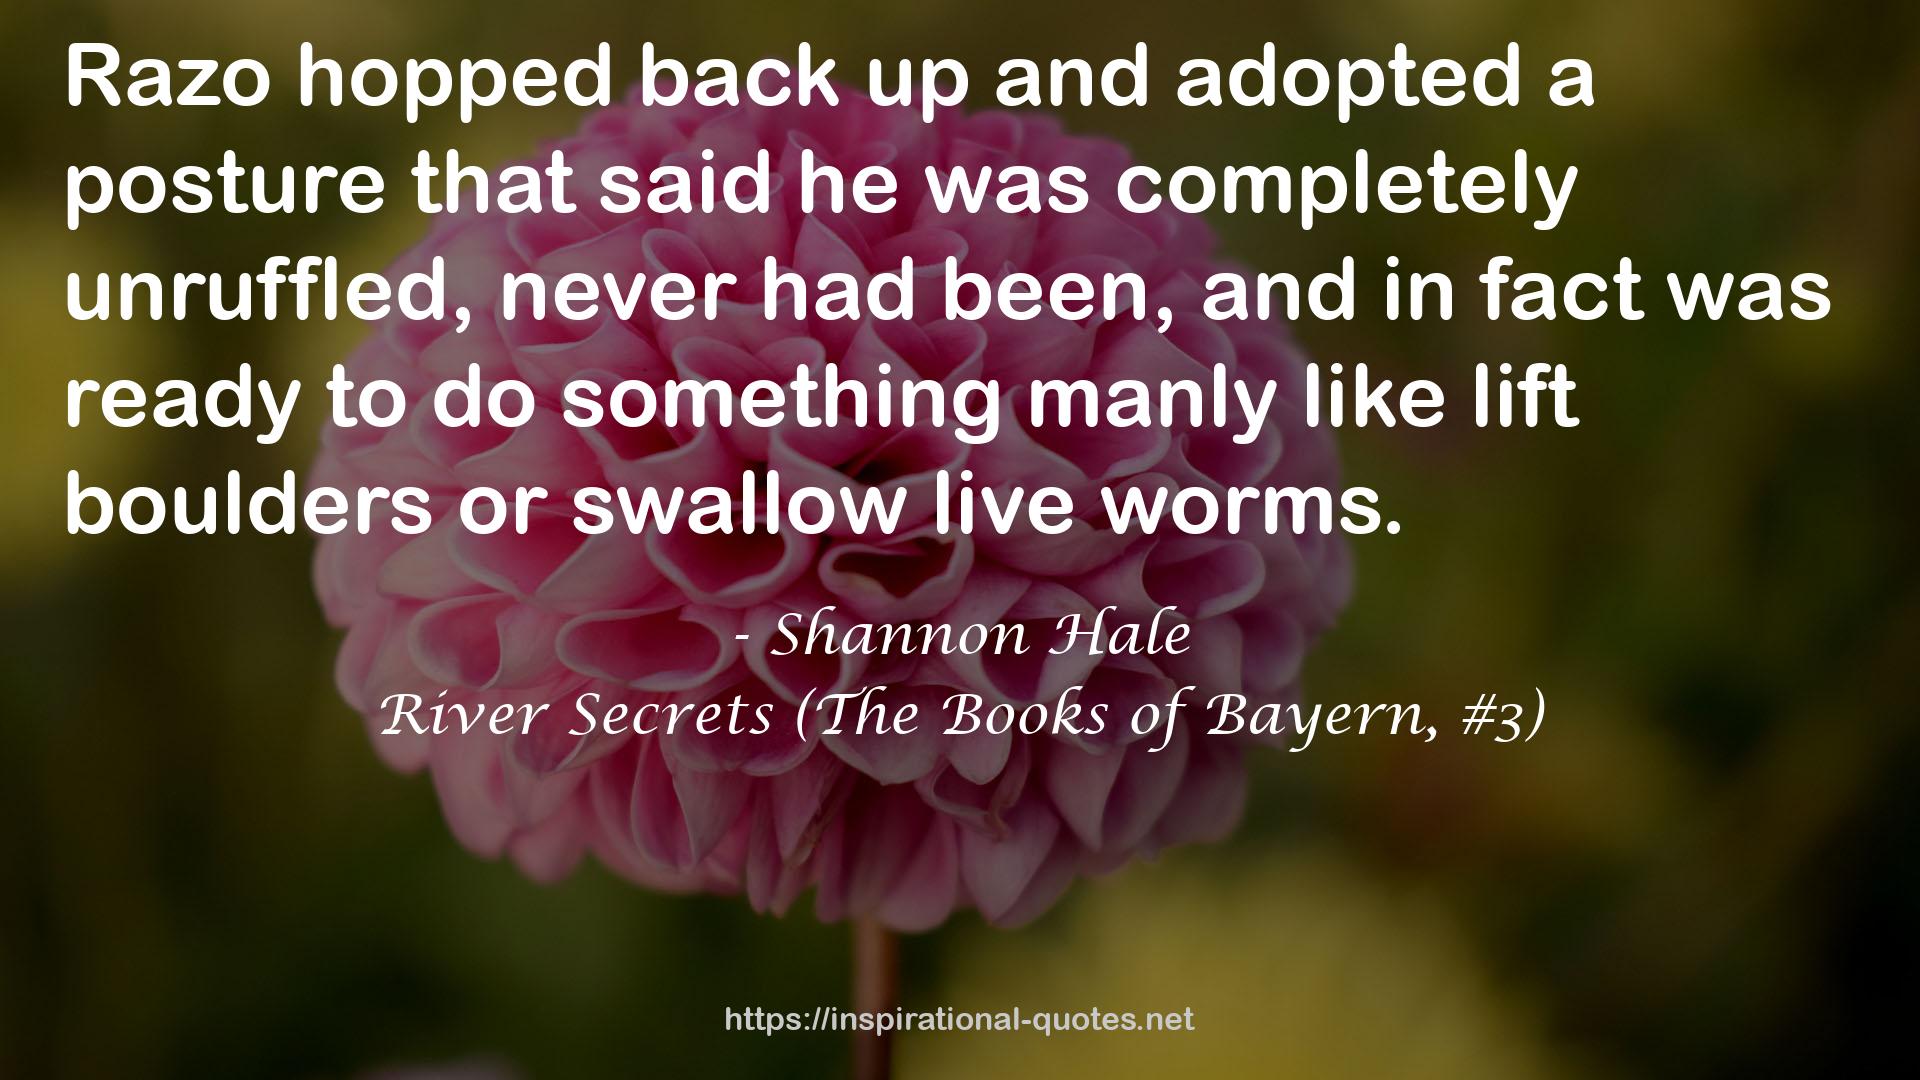 River Secrets (The Books of Bayern, #3) QUOTES